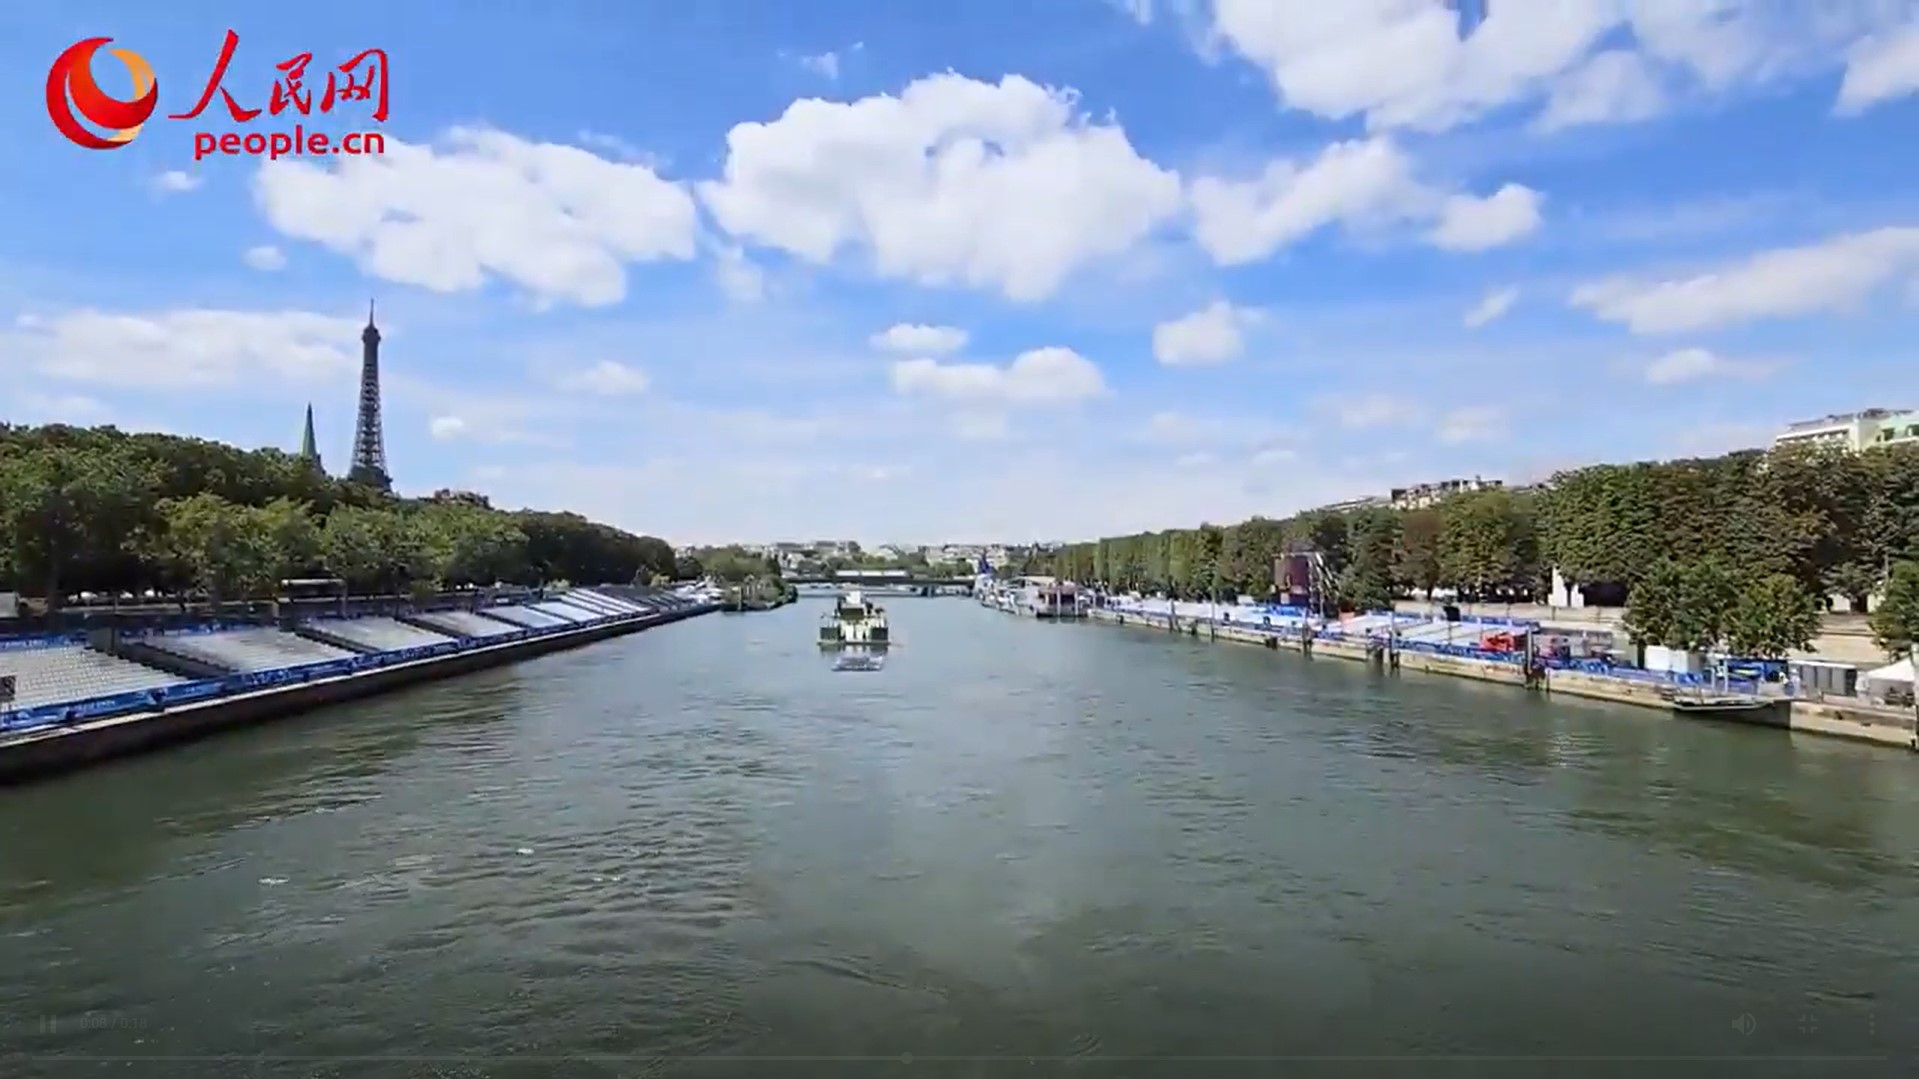 Take a glimpse at the opening ceremony site of the Paris 2024 Olympic Games